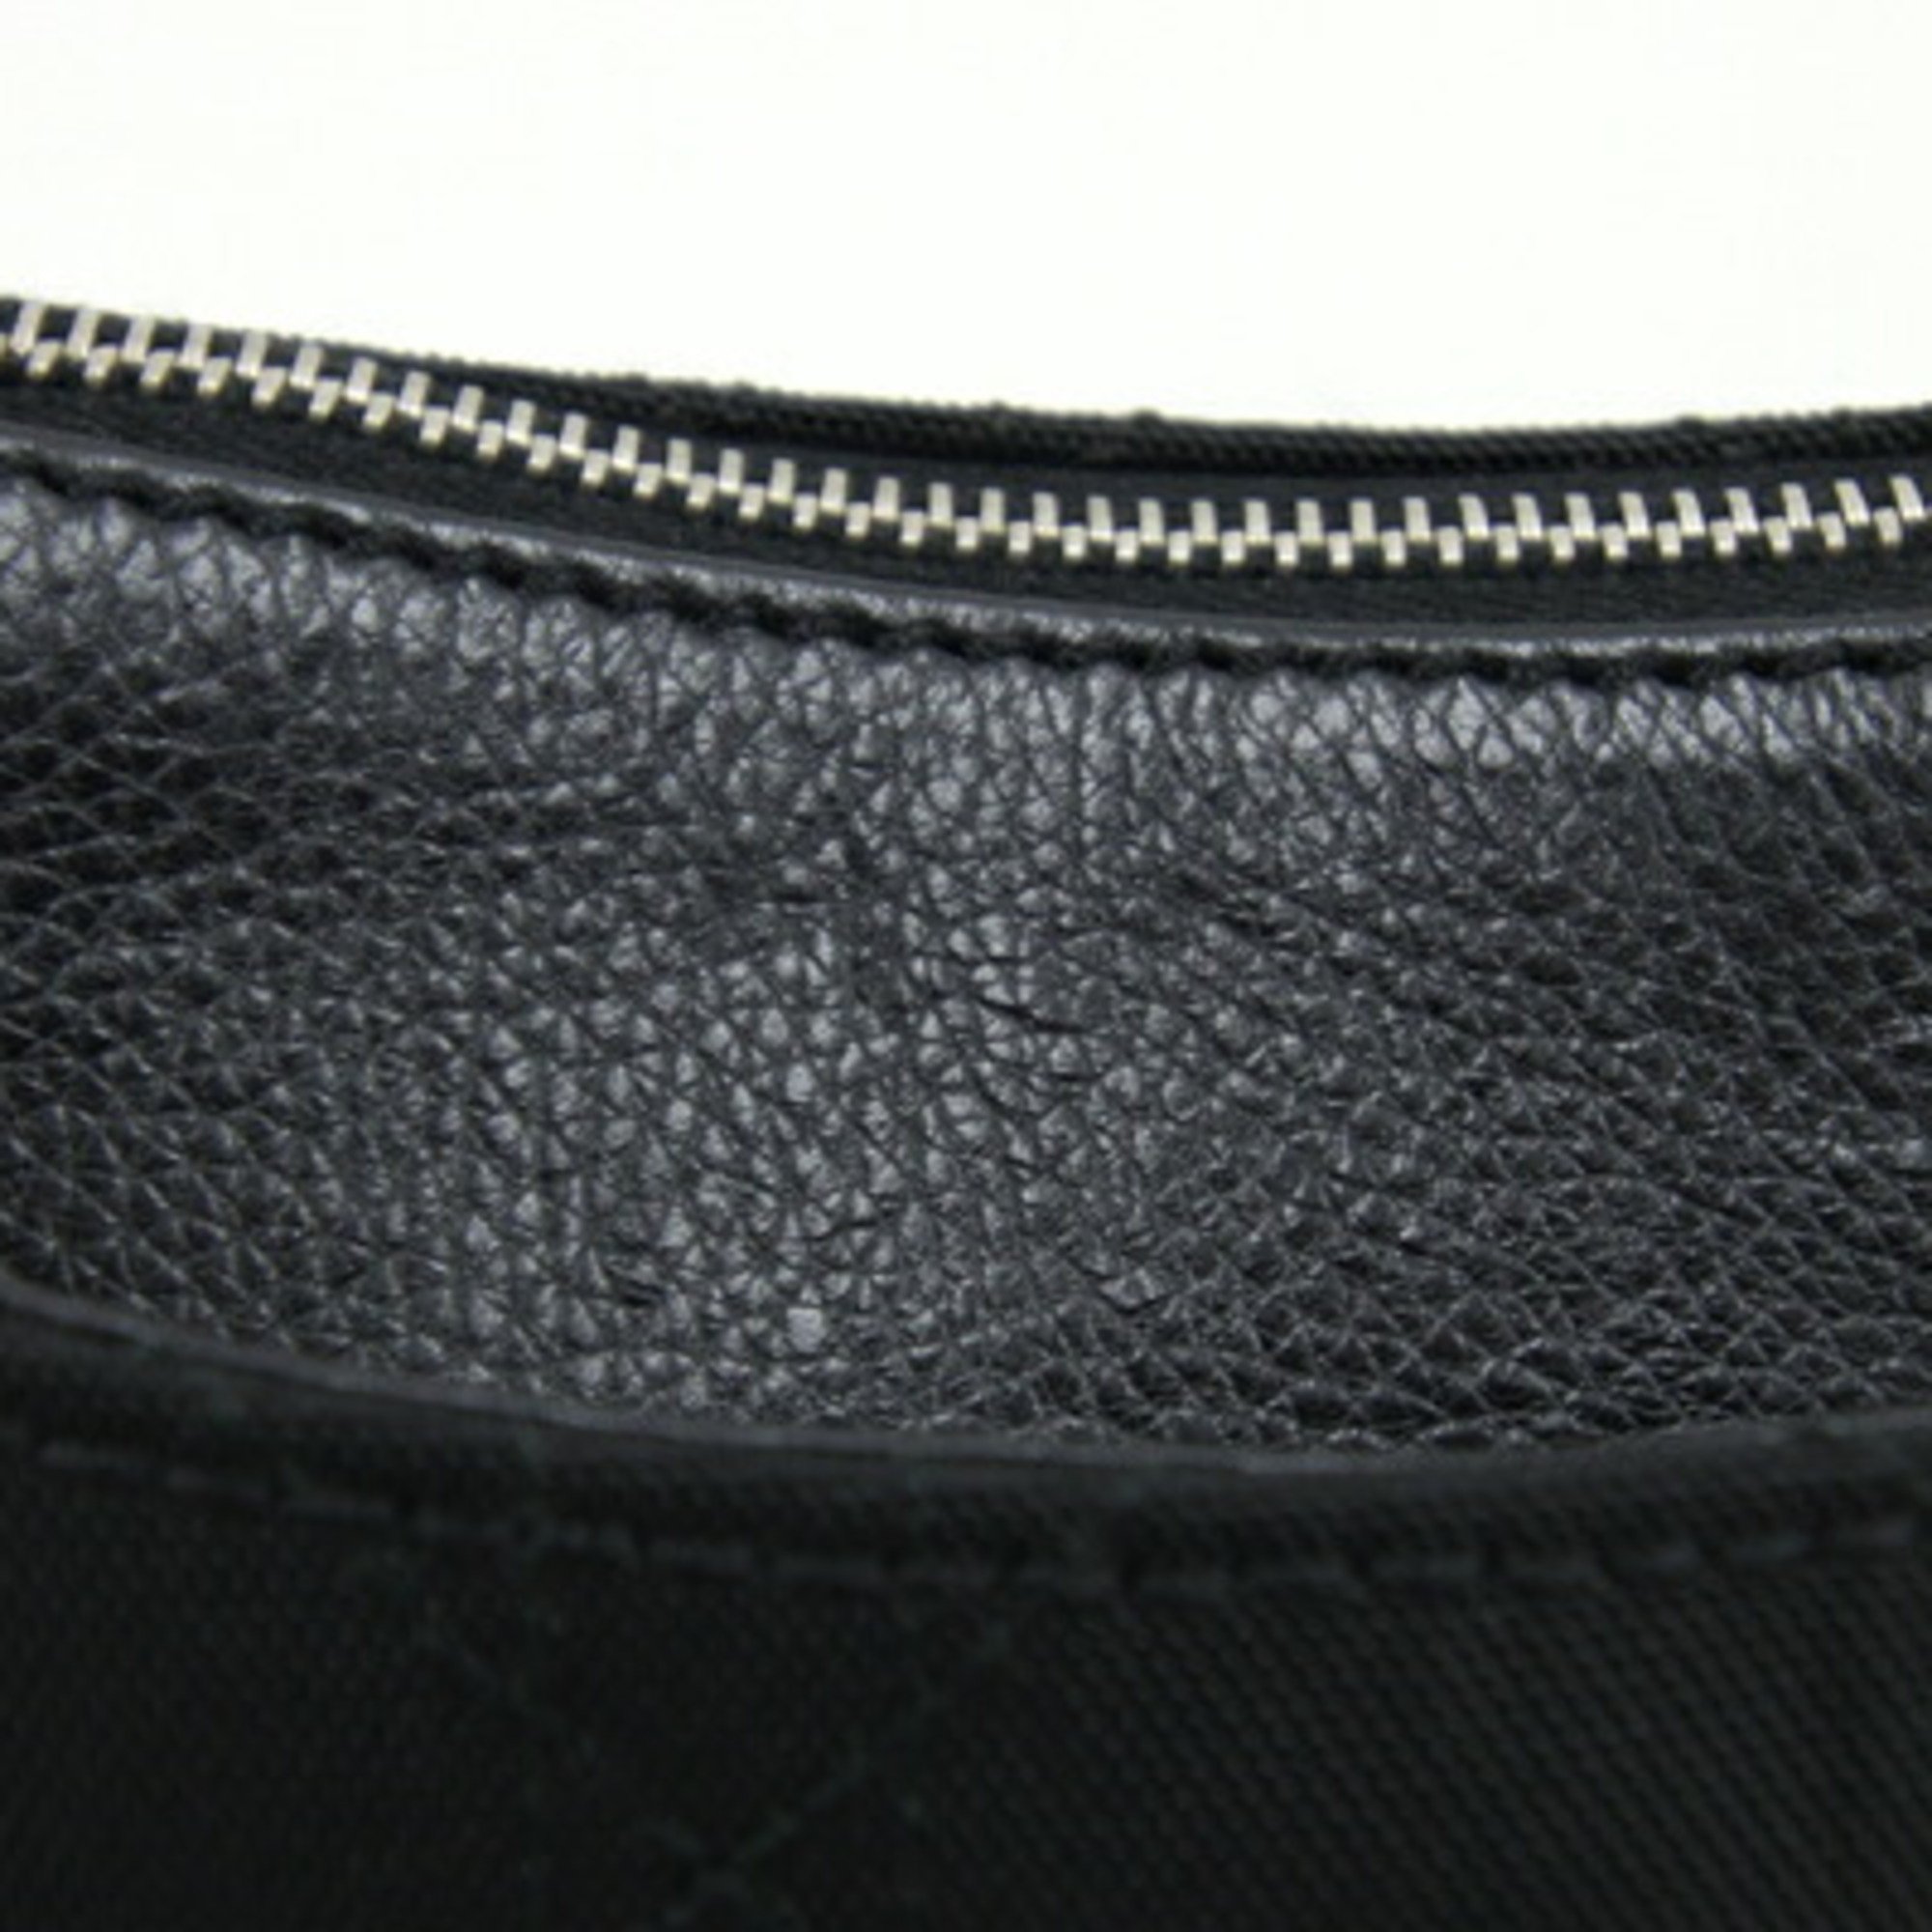 Christian Dior Dior Pouch Cannage Black Canvas Leather Women's DIOR